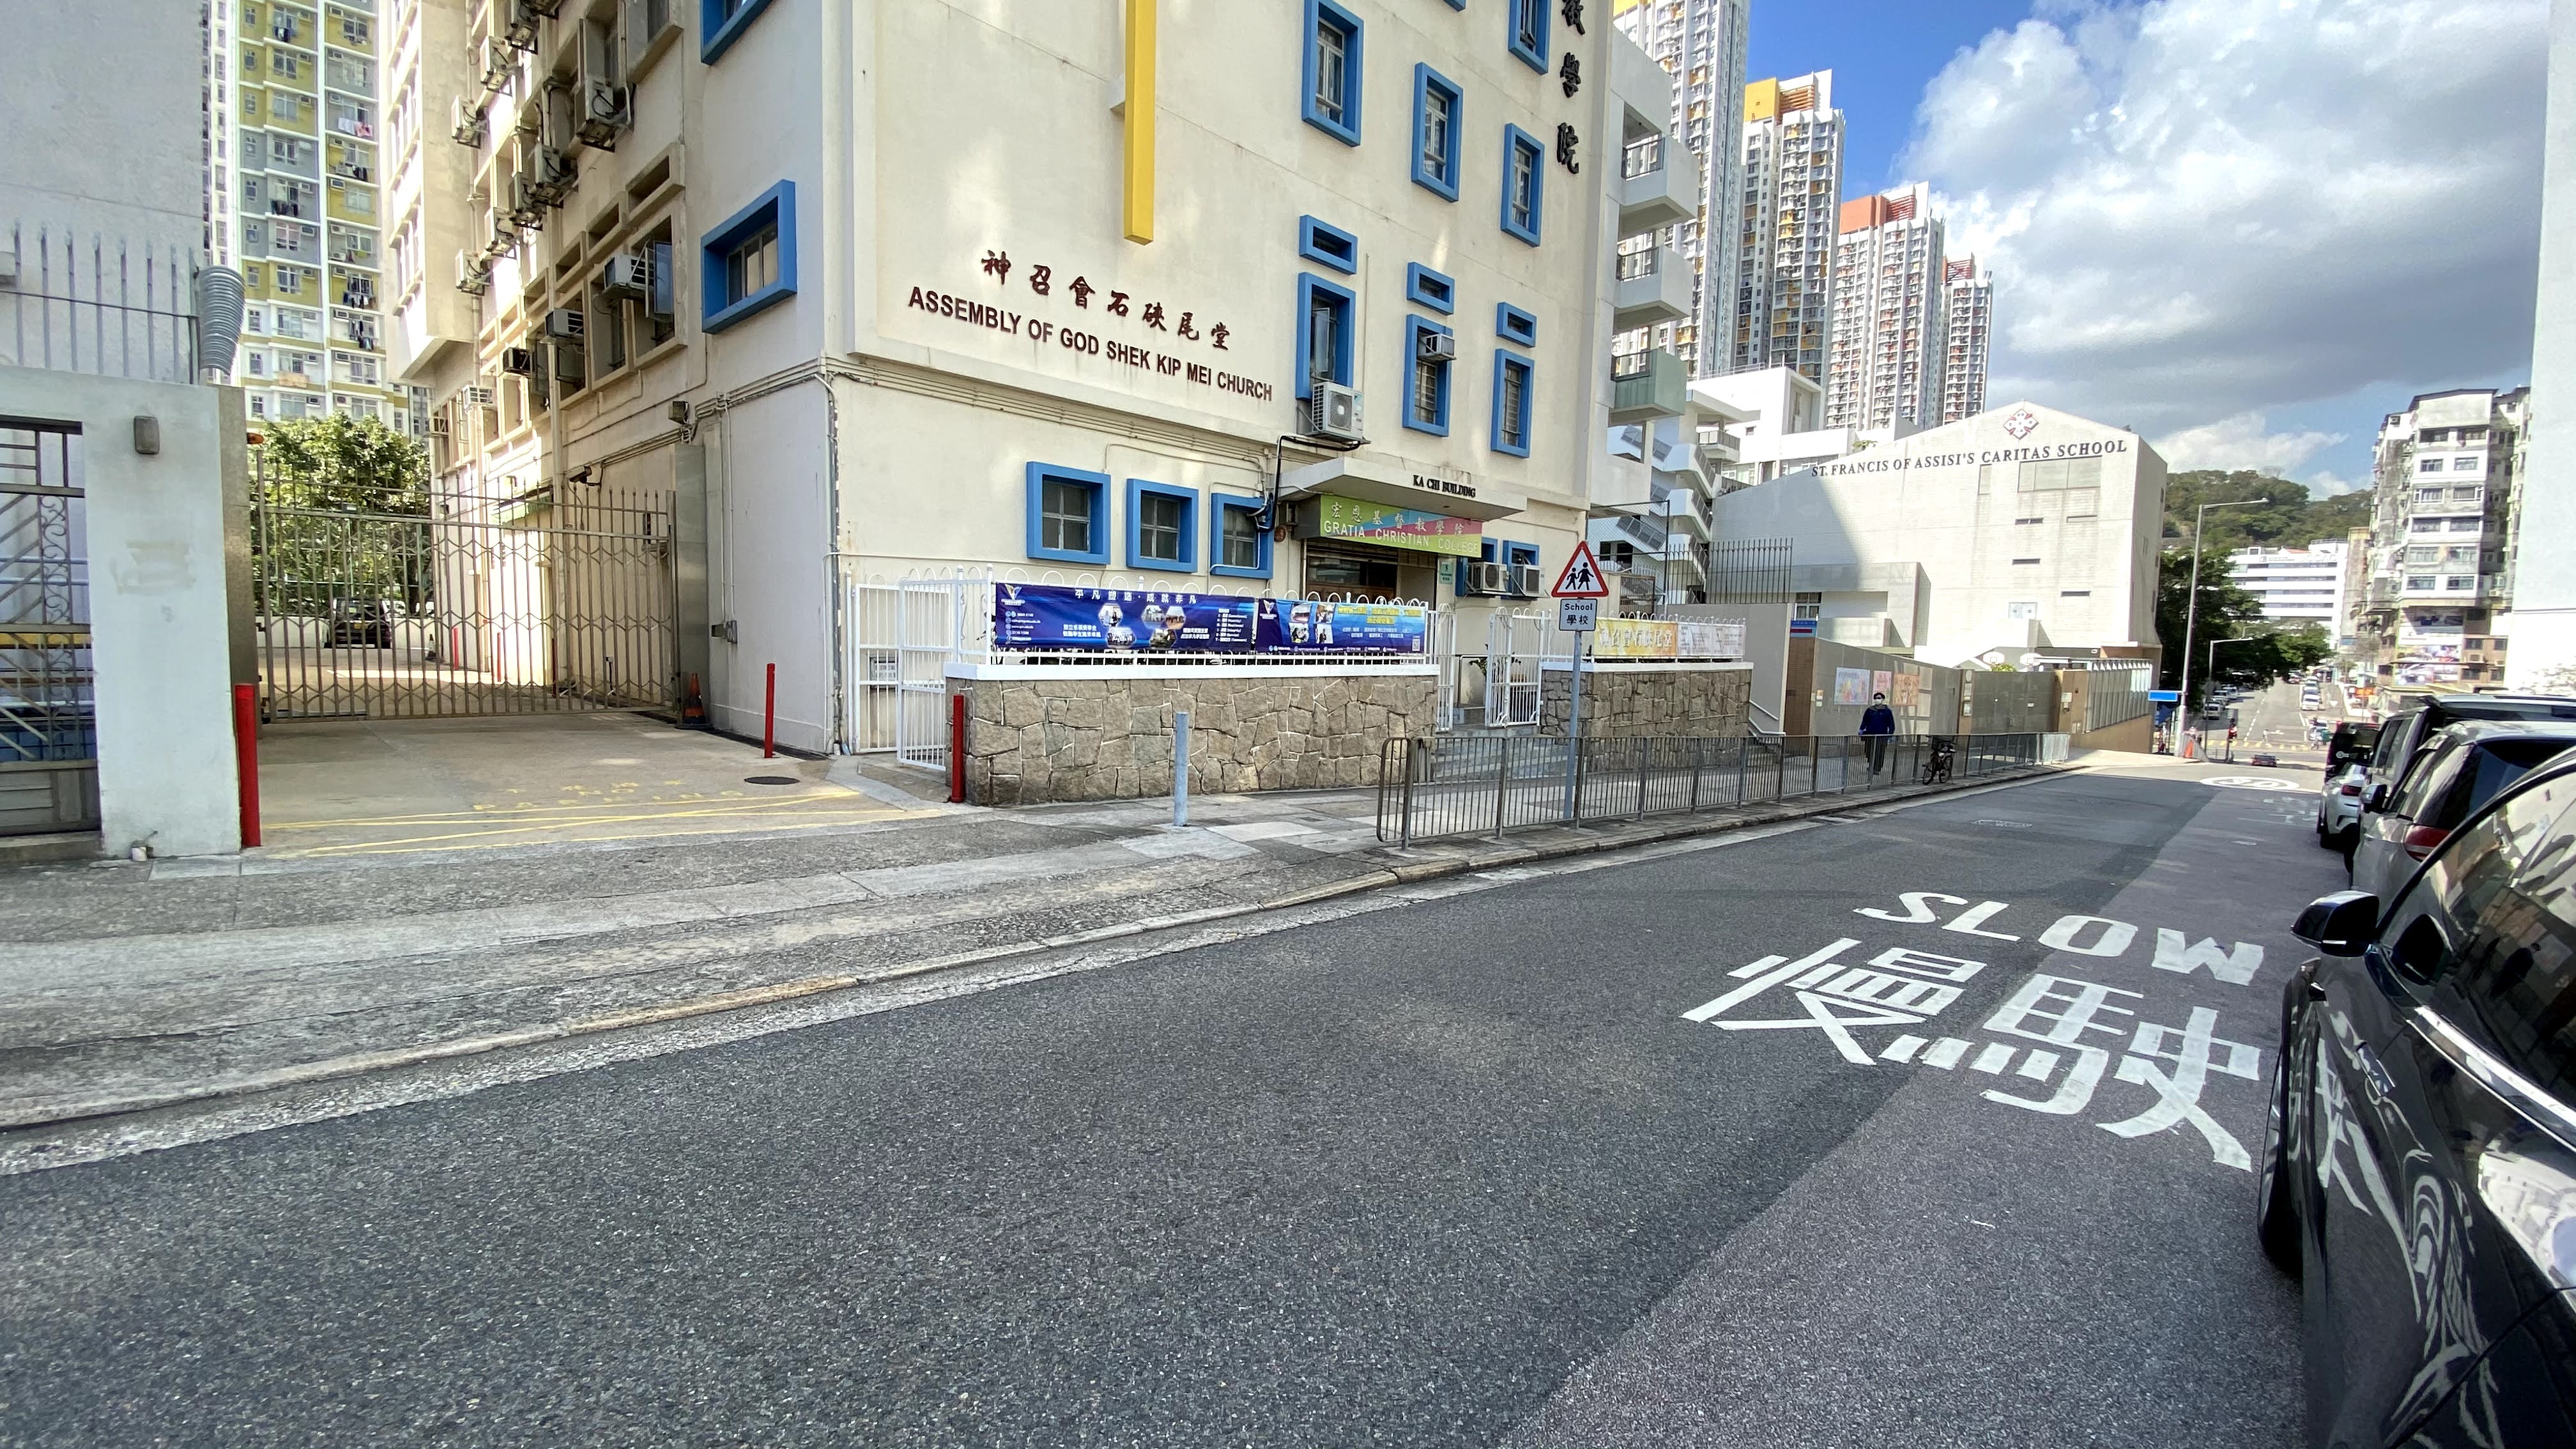 Before implementation of a trial of low speed limit zone at Wai Chi Street, Sham Shui Po